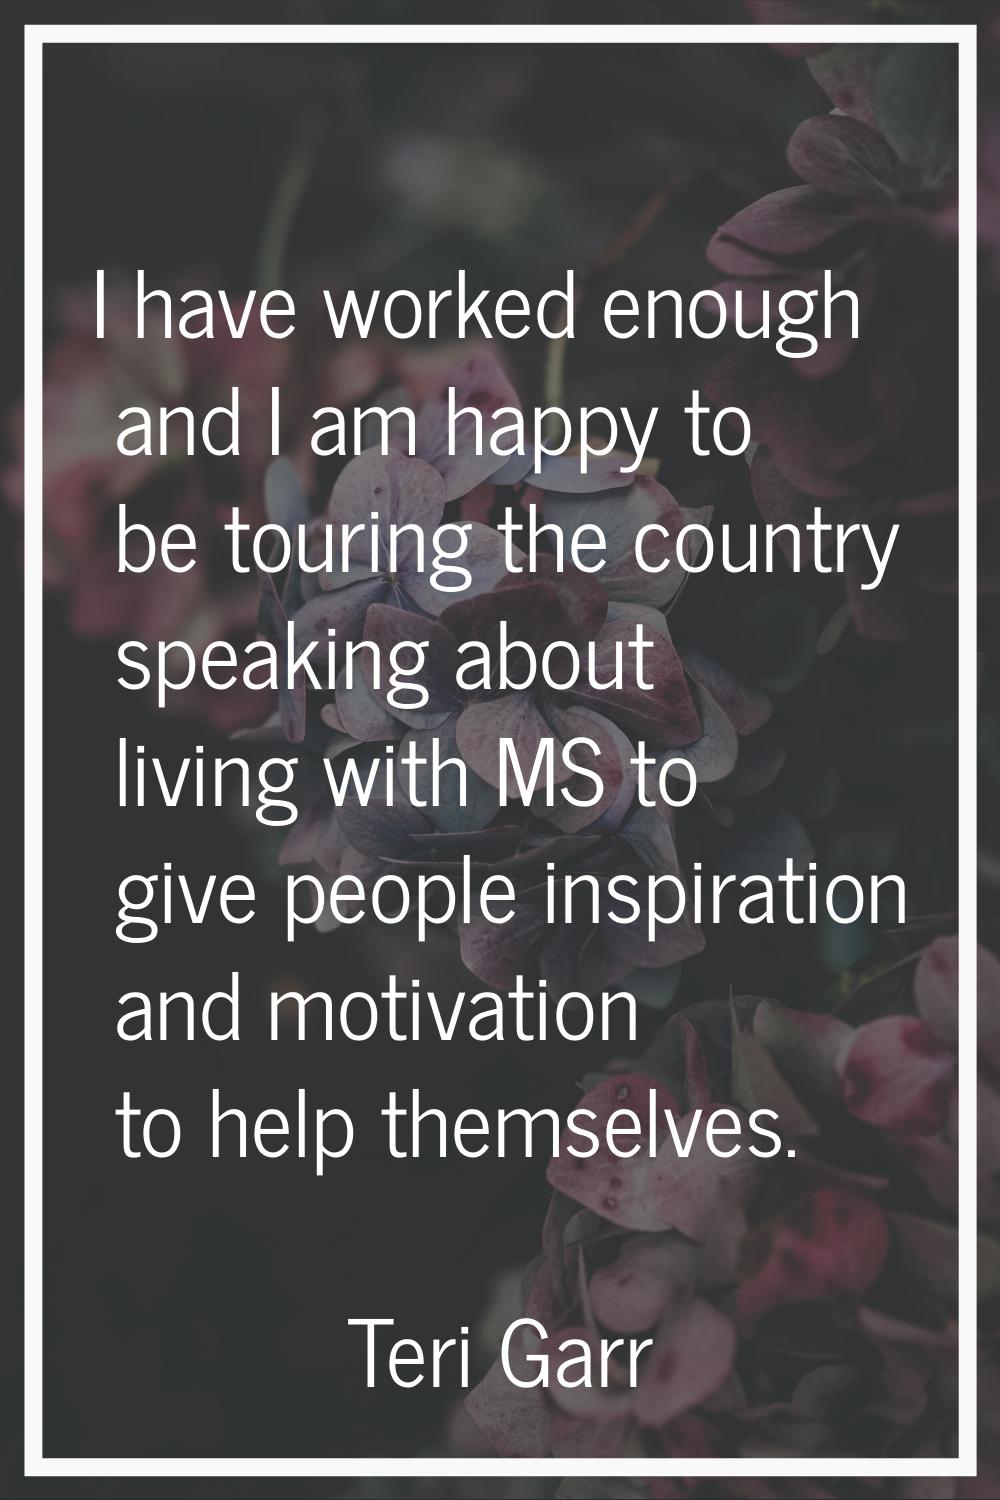 I have worked enough and I am happy to be touring the country speaking about living with MS to give